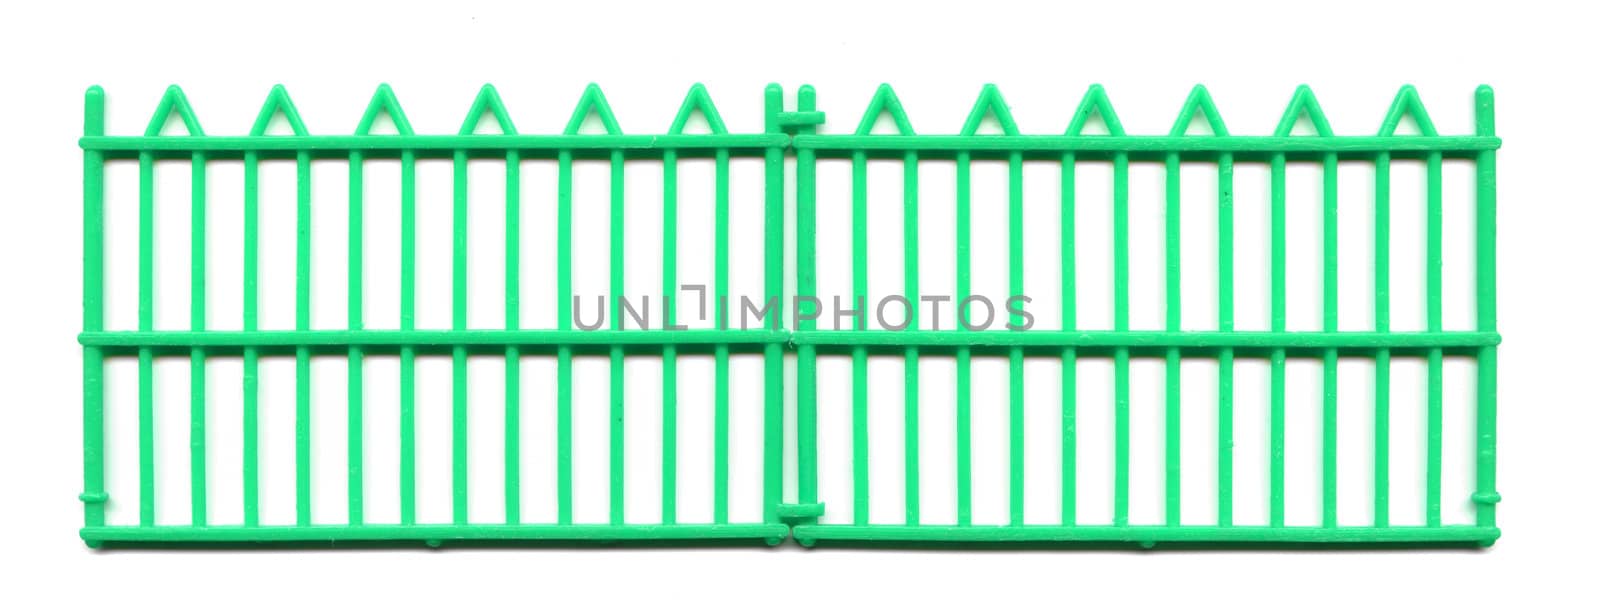 Garden fence or gate isolated on white